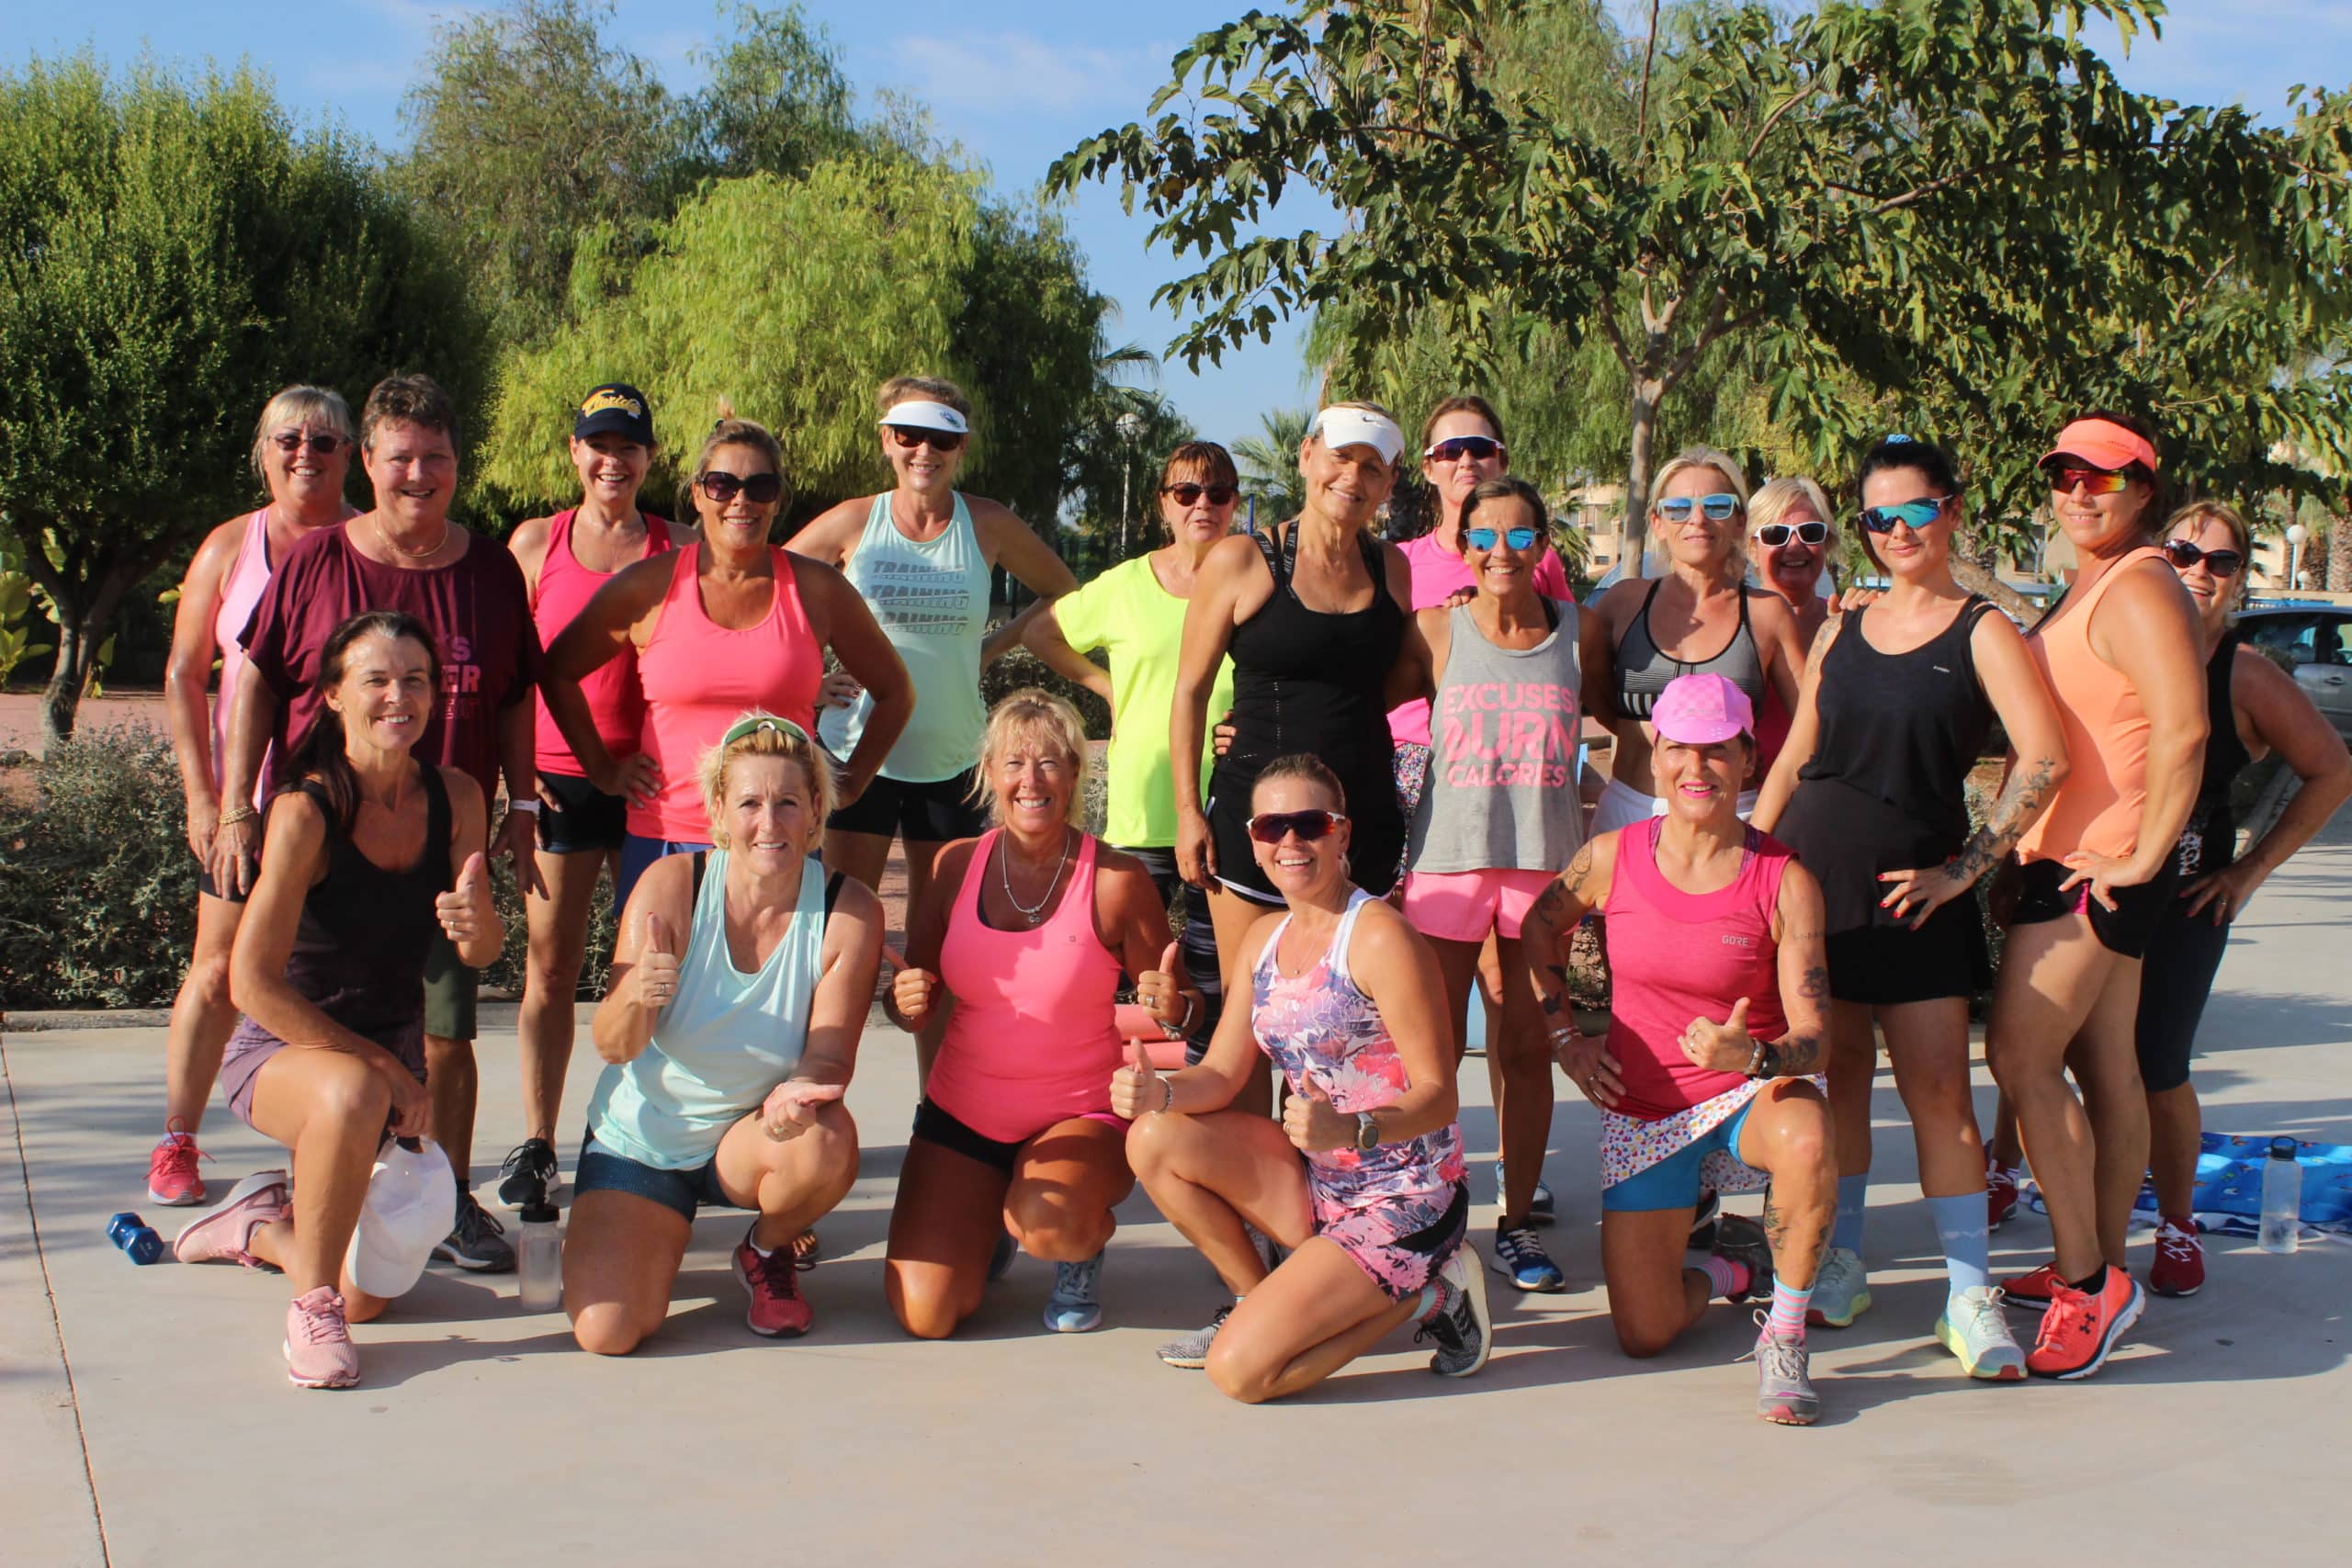 Shaping up with La Zenia’s Playground babes